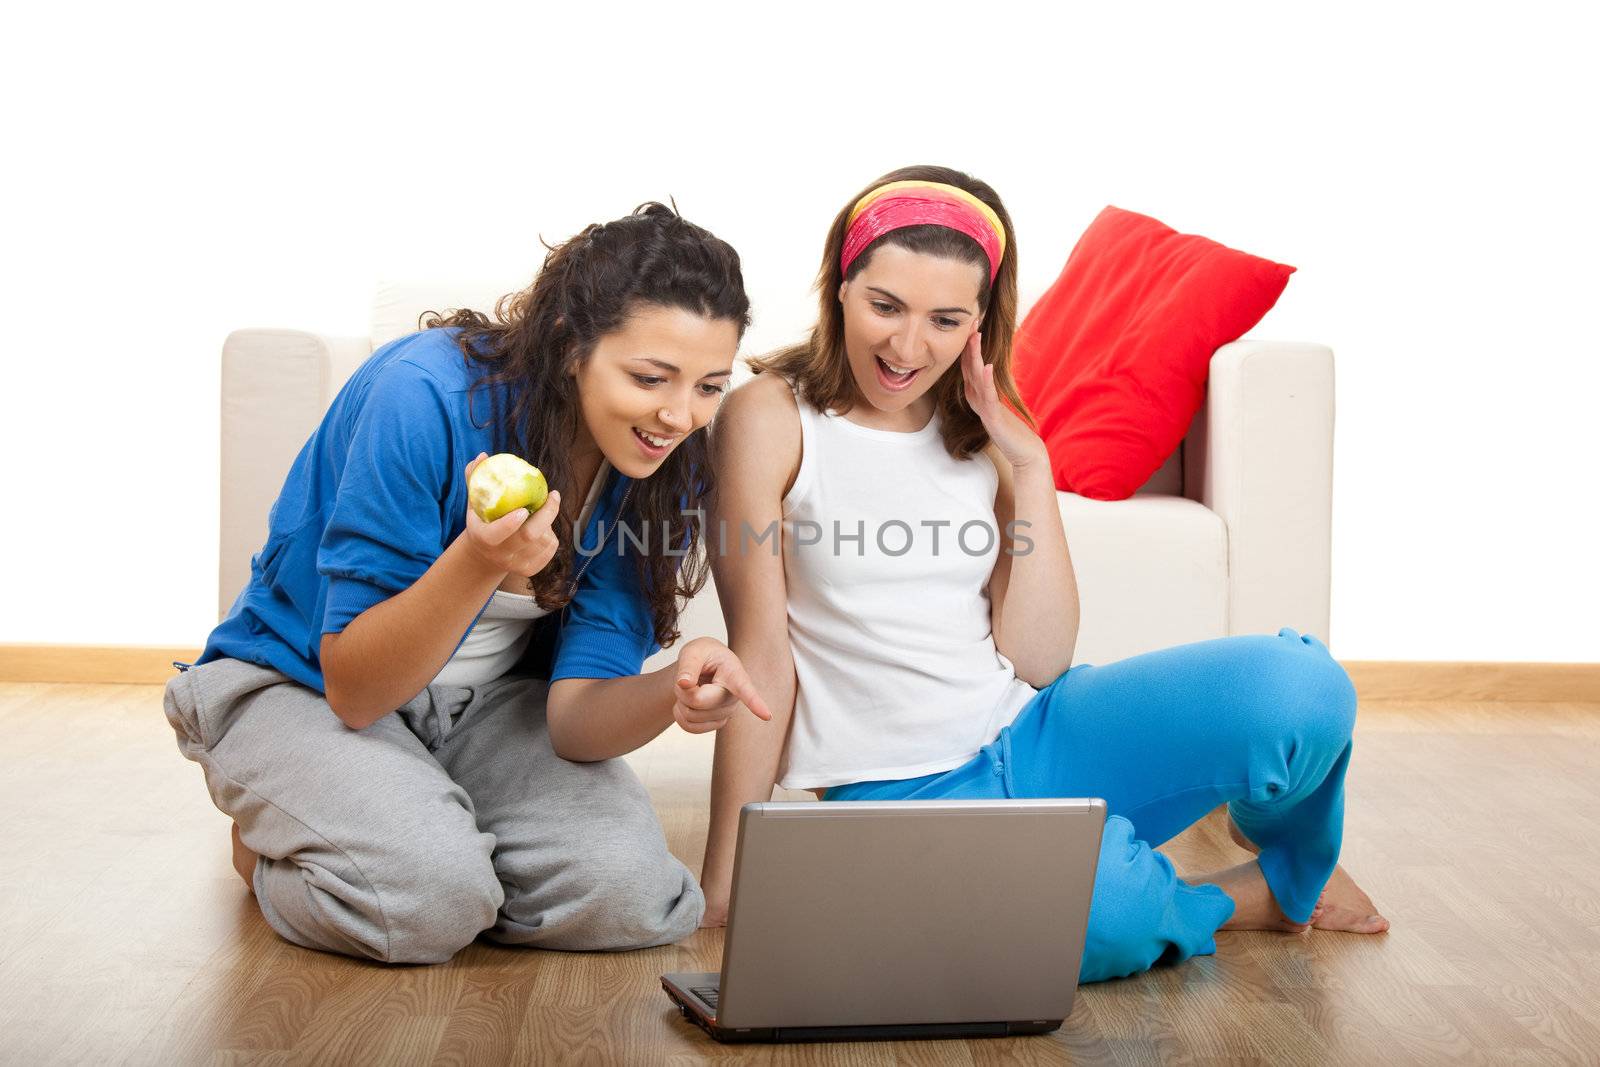 Two beautiful young women sitting on floor working with a laptop